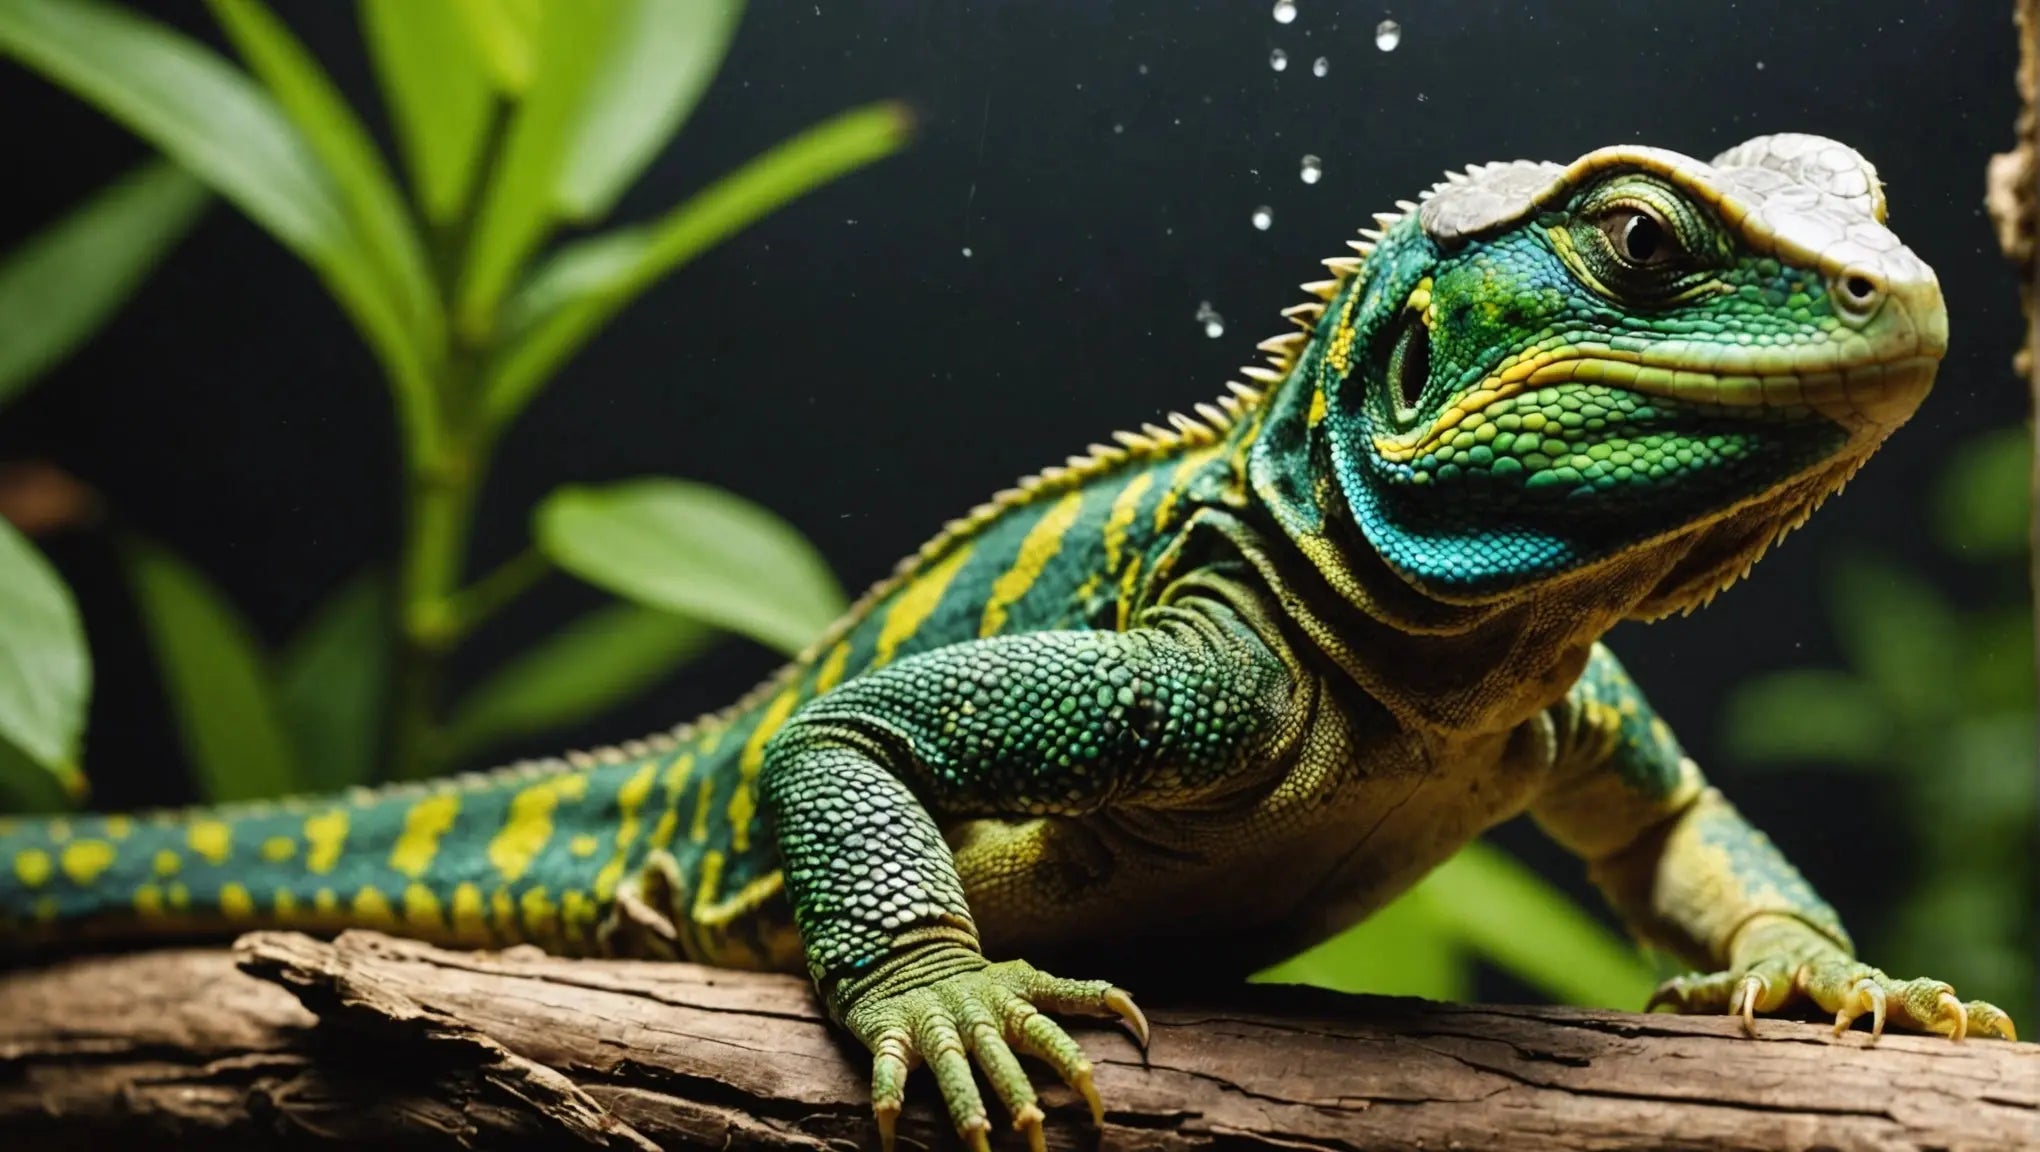 Keep Your Reptile Hydrated with Premium Reptile Water Supplies